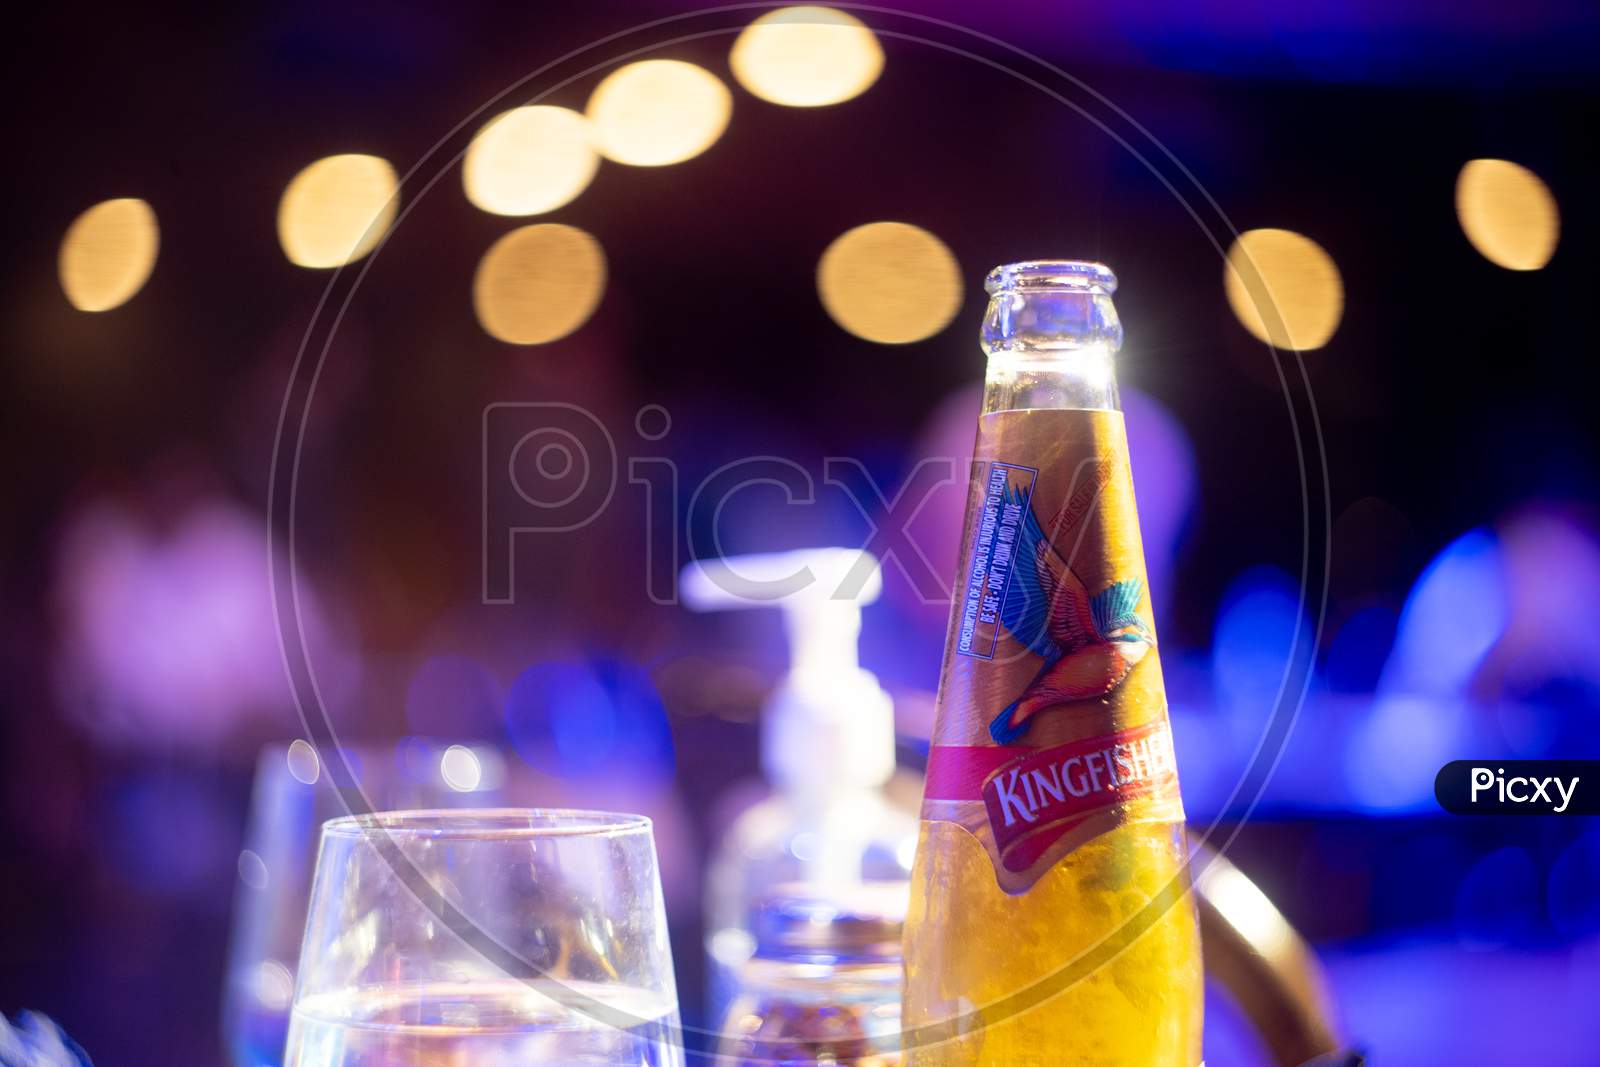 Famous Indian Beer Brand Kingfisher Bottle With Bubble Coming Out With Out Of Focus Background Lights With Bokeh Balls Showing It Placed In A Bar Club Pub Nightlife Spot In Bangalore, Mumbai With Alcohol Placed All Around